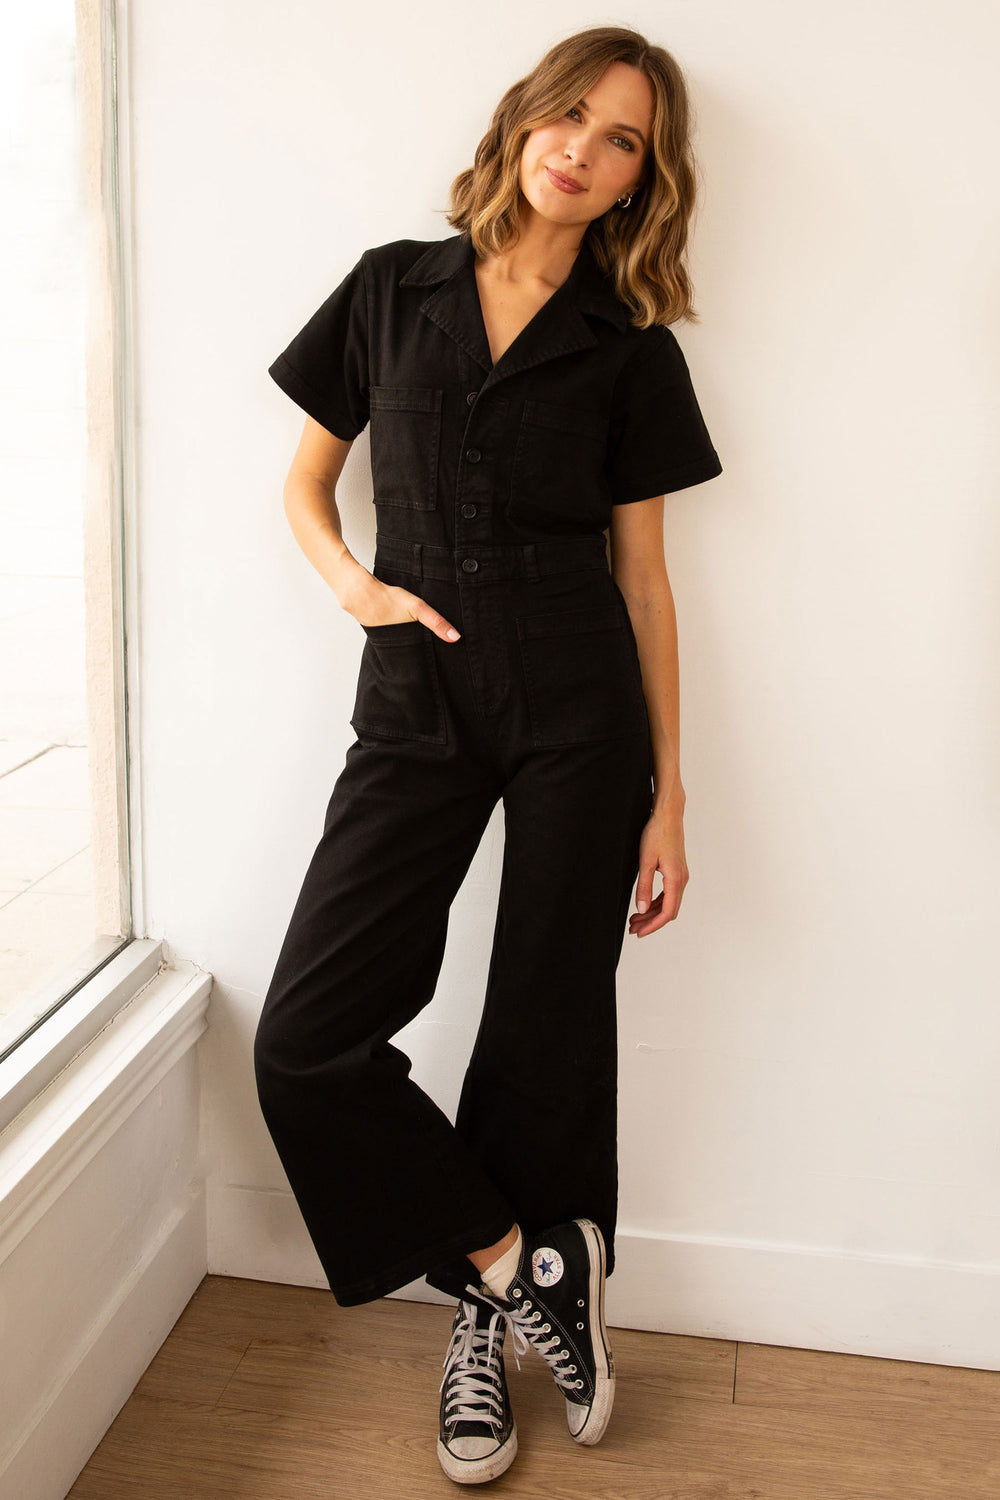 Logan Jumpsuit in Black - Whimsy & Row